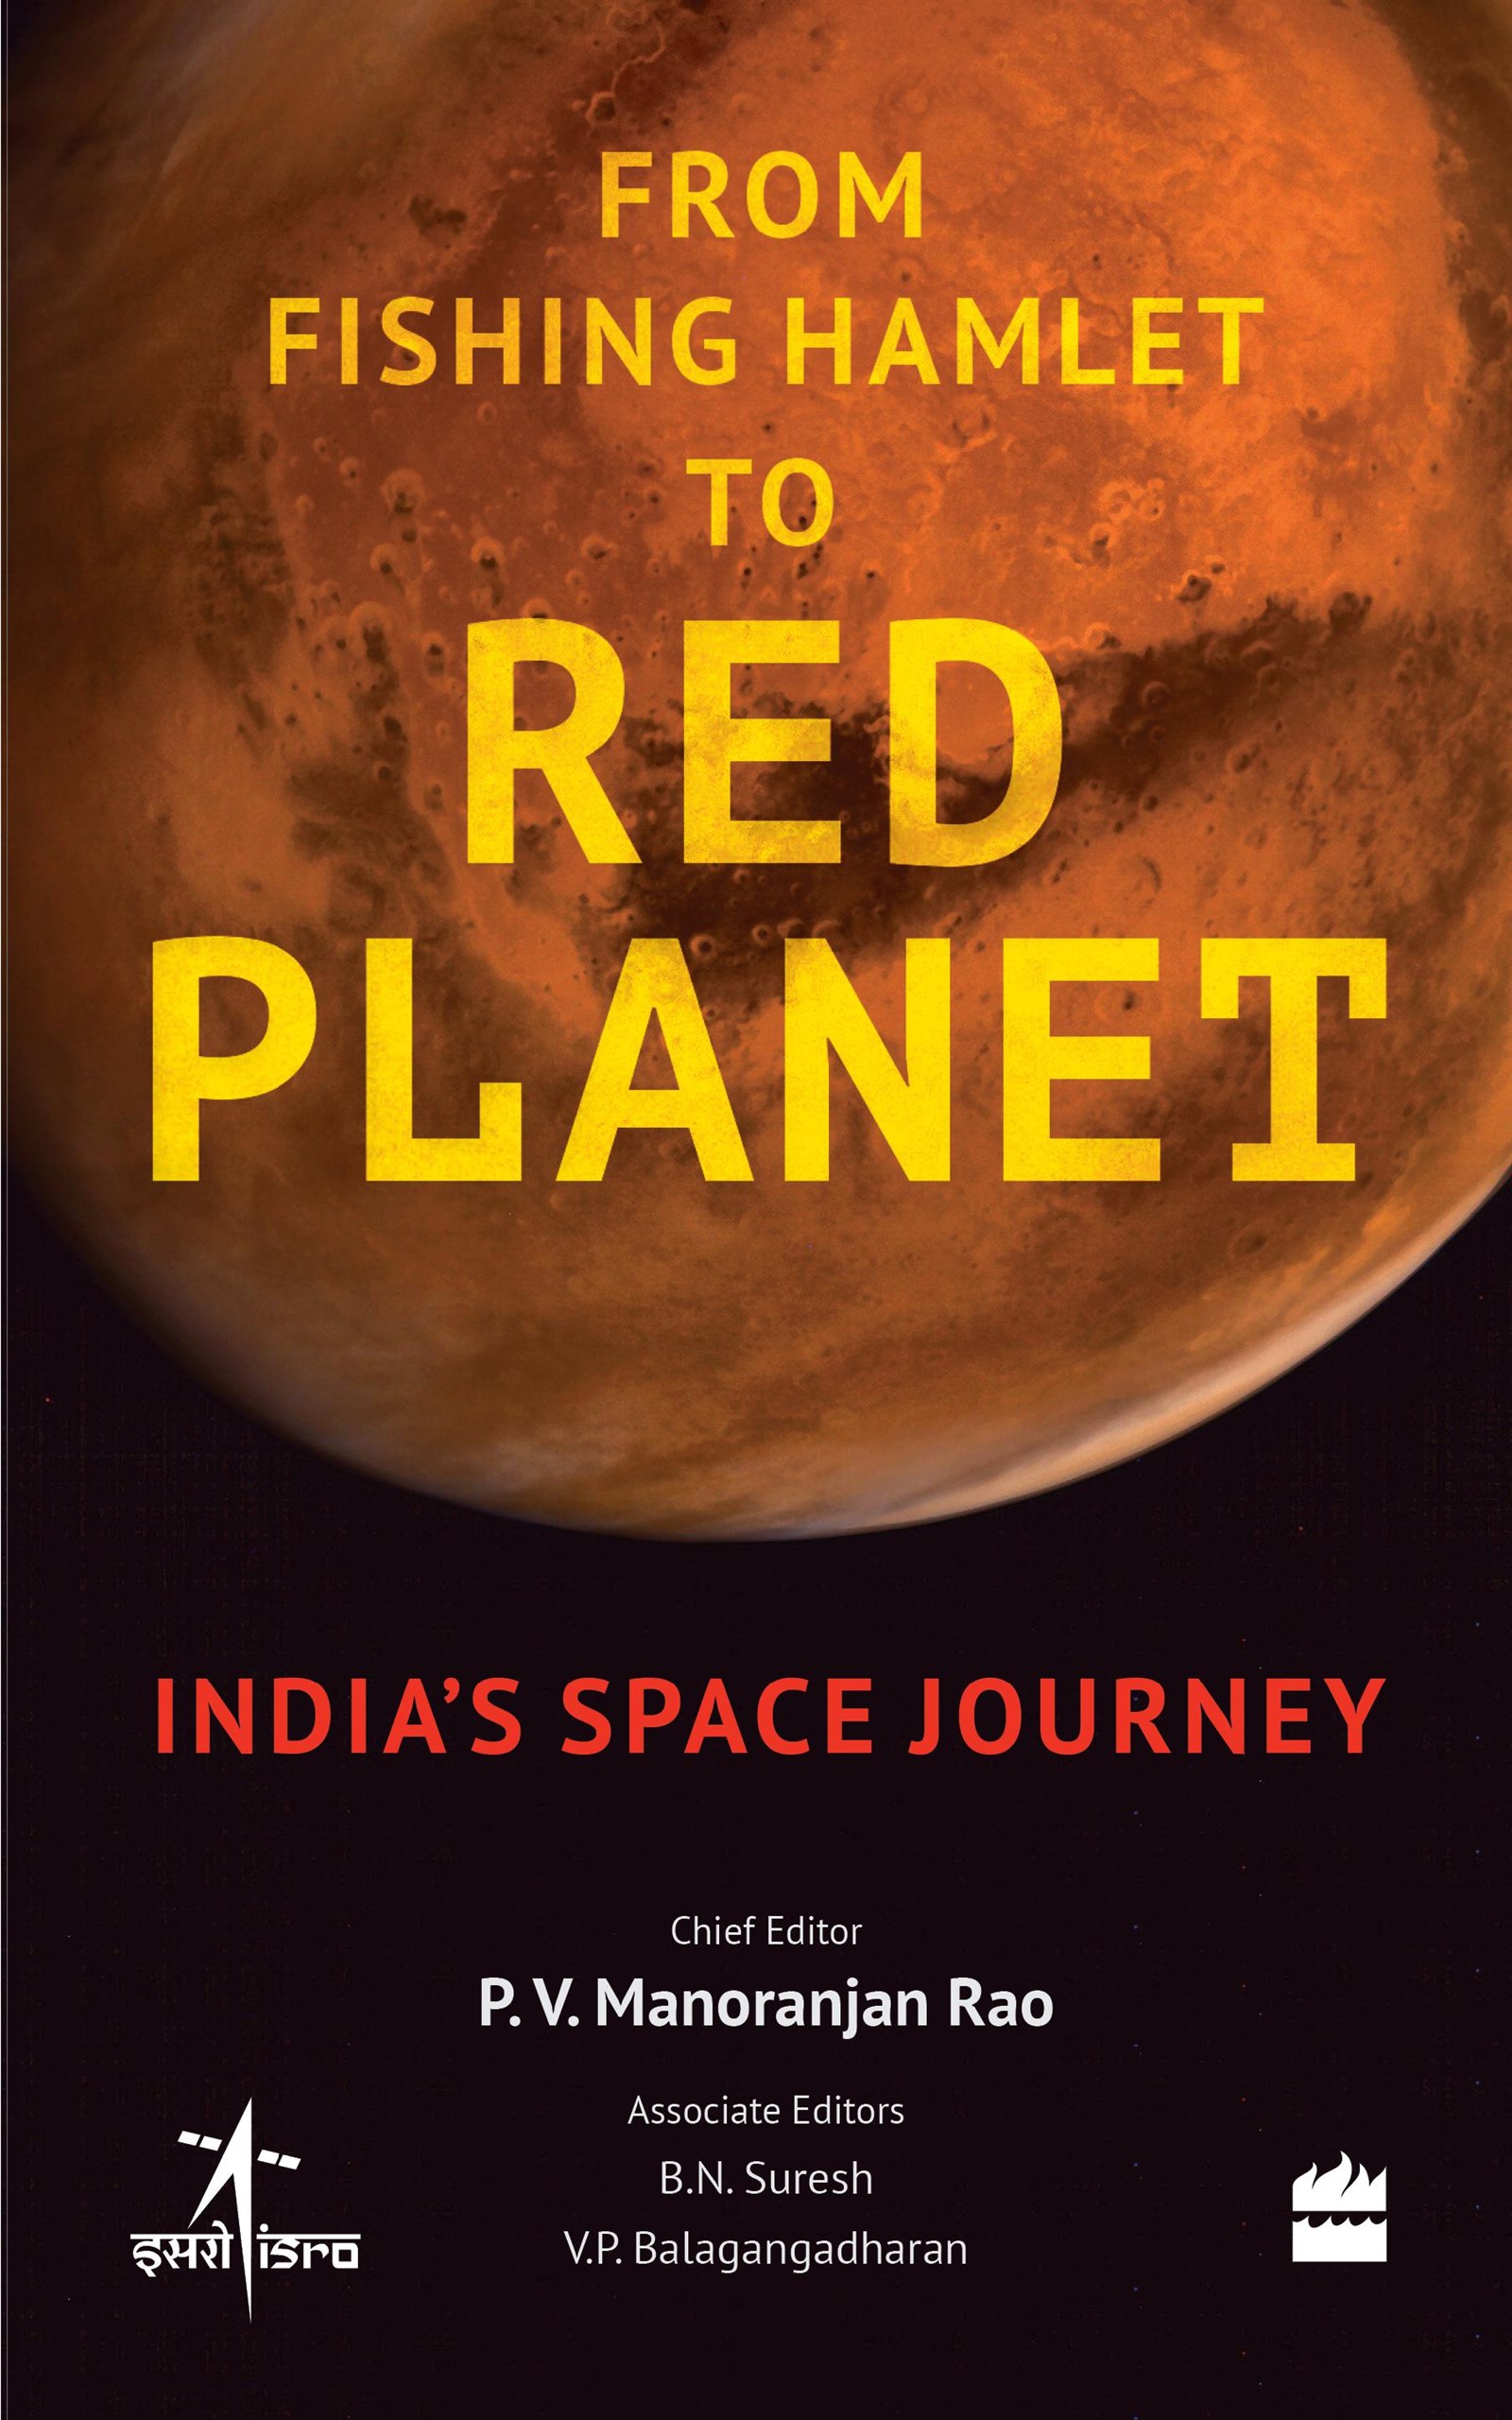 You are currently viewing From Fishing Hamlet to Red Planet – ಸಮುದ್ರದಂಗಳದಿಂದ ಮಂಗಳನೆಡೆಗೆ